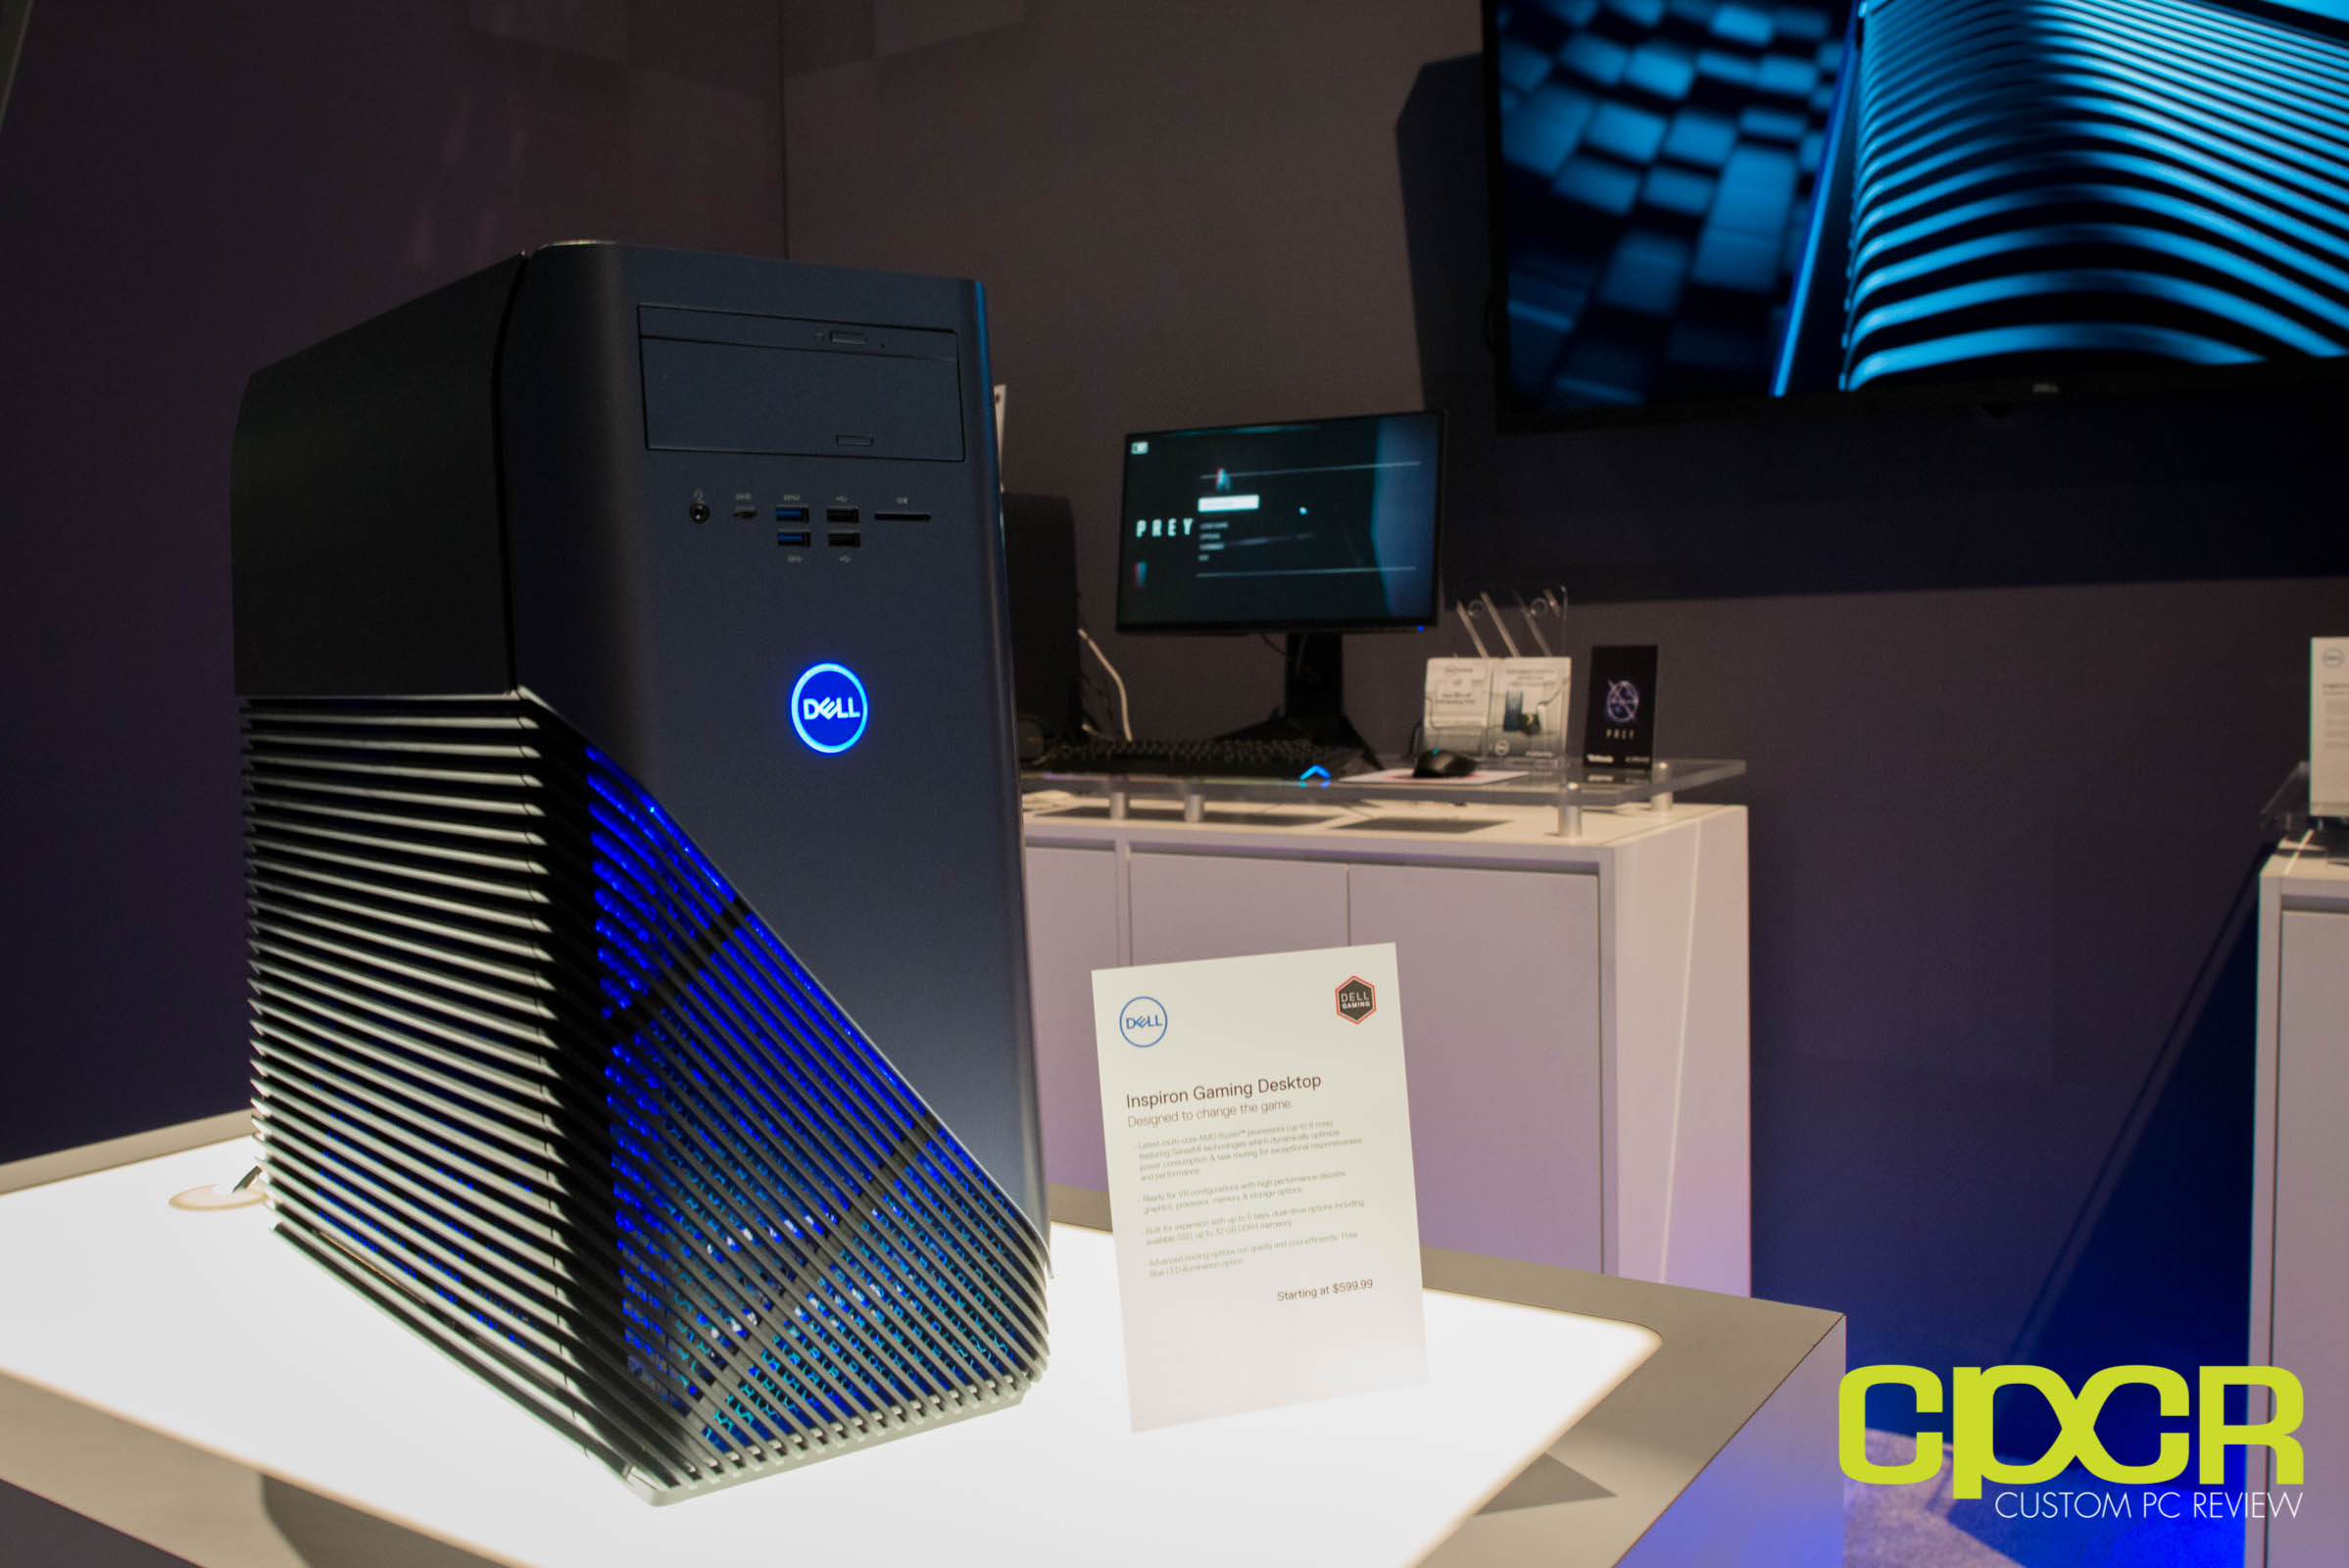 AMD Scores Major Win in Dell Inspiron 5675 Gaming at E3 2017 | Custom PC Review